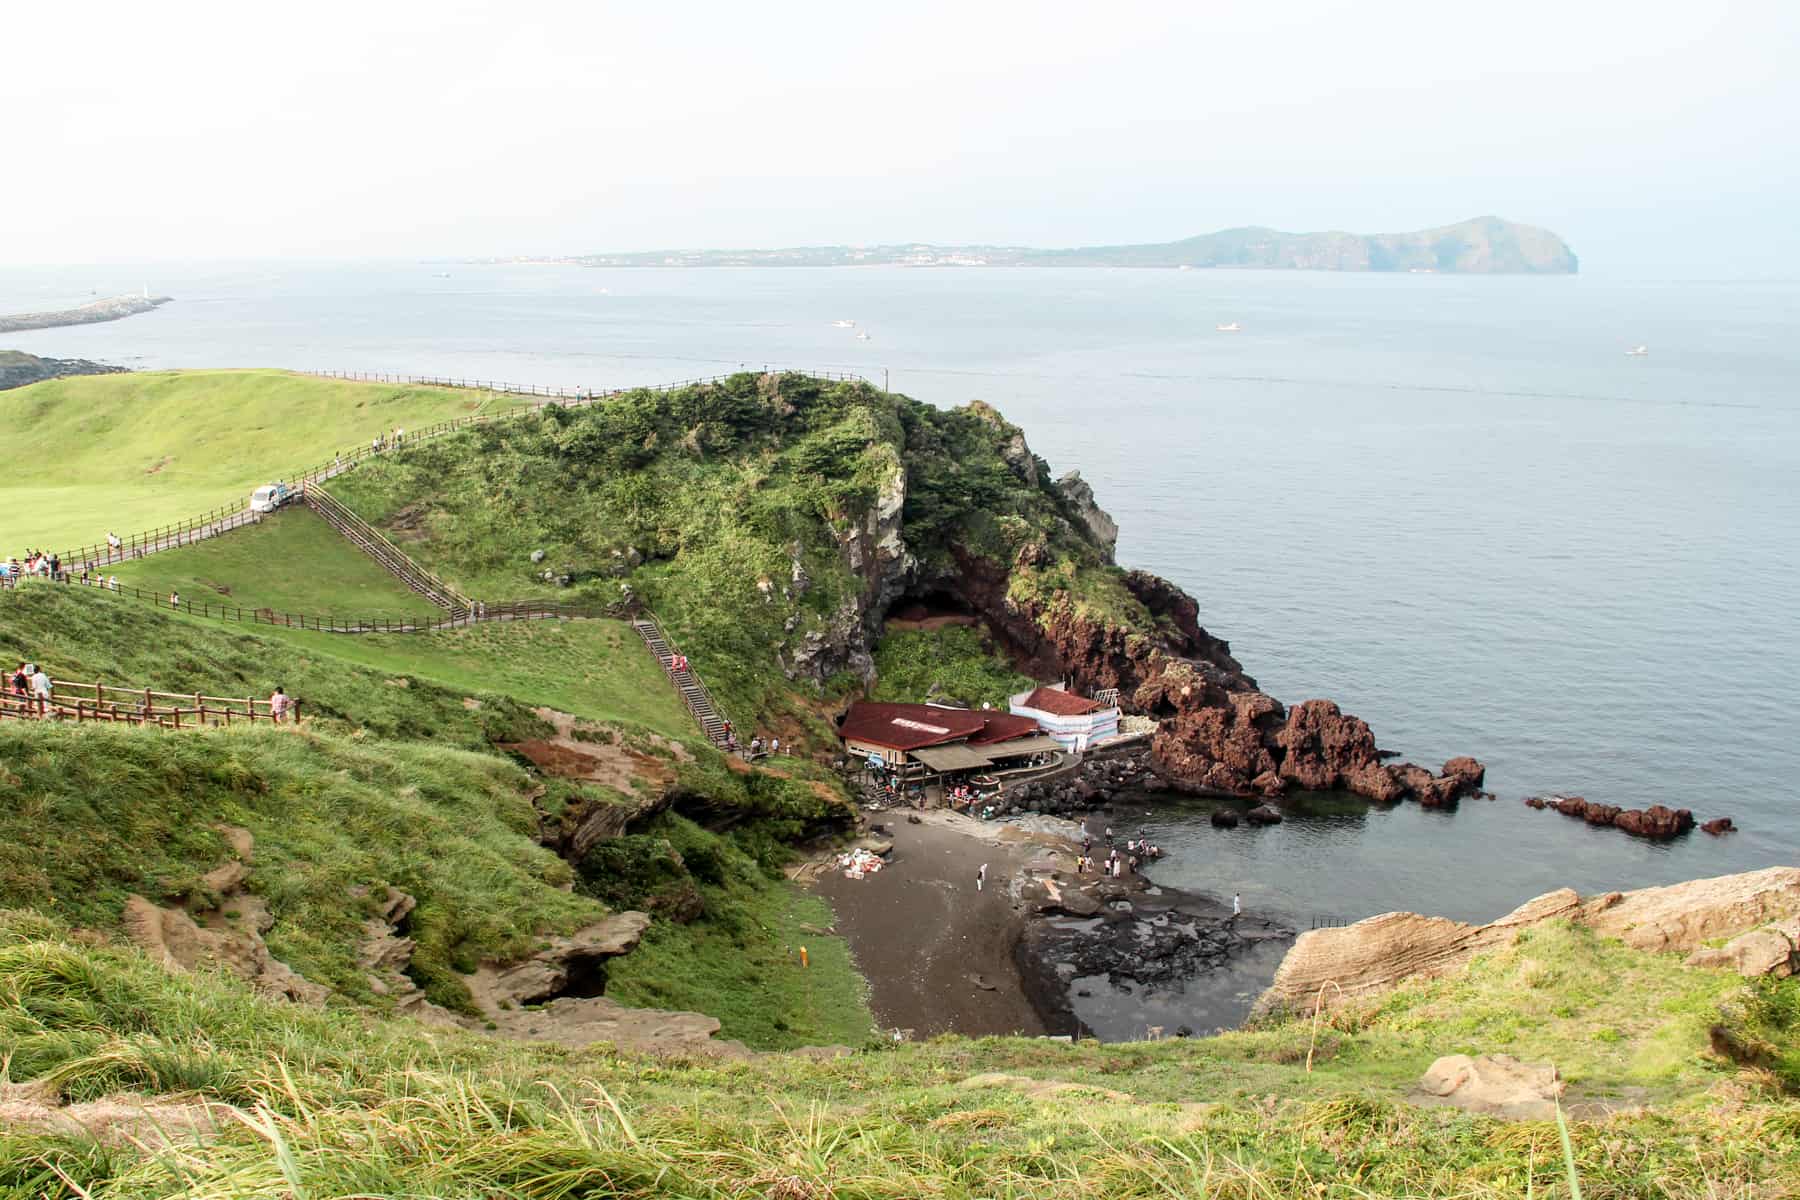 People strolling up a series of narrow walking paths on a green mound of Jeju Island's Sunrise Peak, looking down onto red-roofed houses, coastal rocks and the vast ocean.